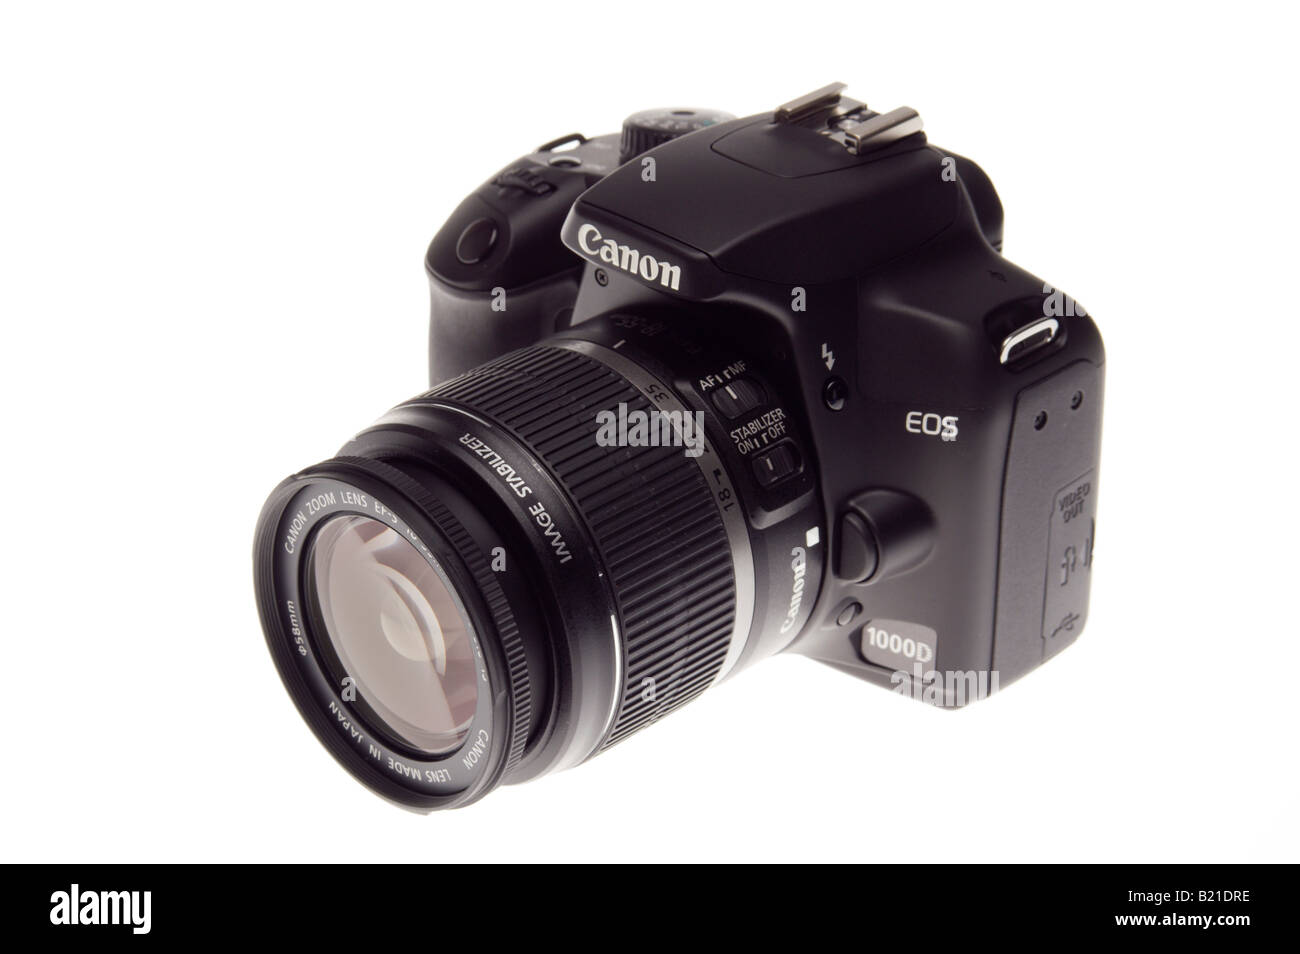 Canon EOS 1000D digital SLR camera July 2008 launch product shot with  18-55mm IS image stablised lens Stock Photo - Alamy